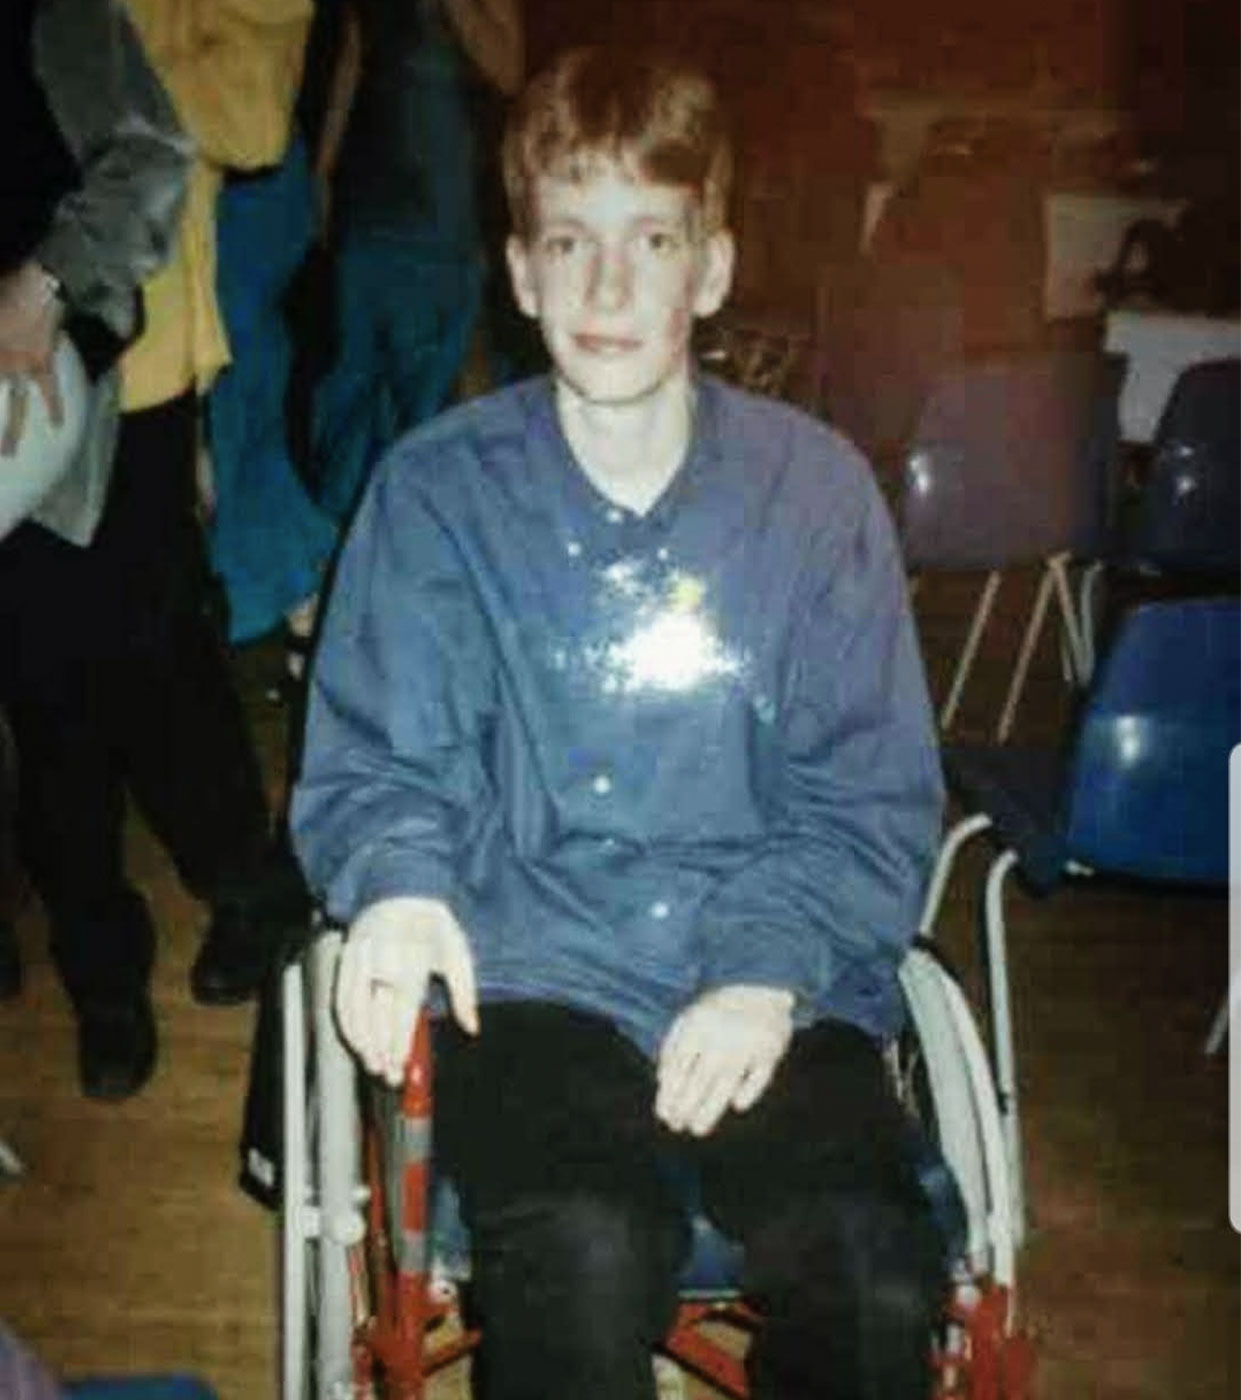 A blond haired boy, around 12 years of age, in a wheelchair.